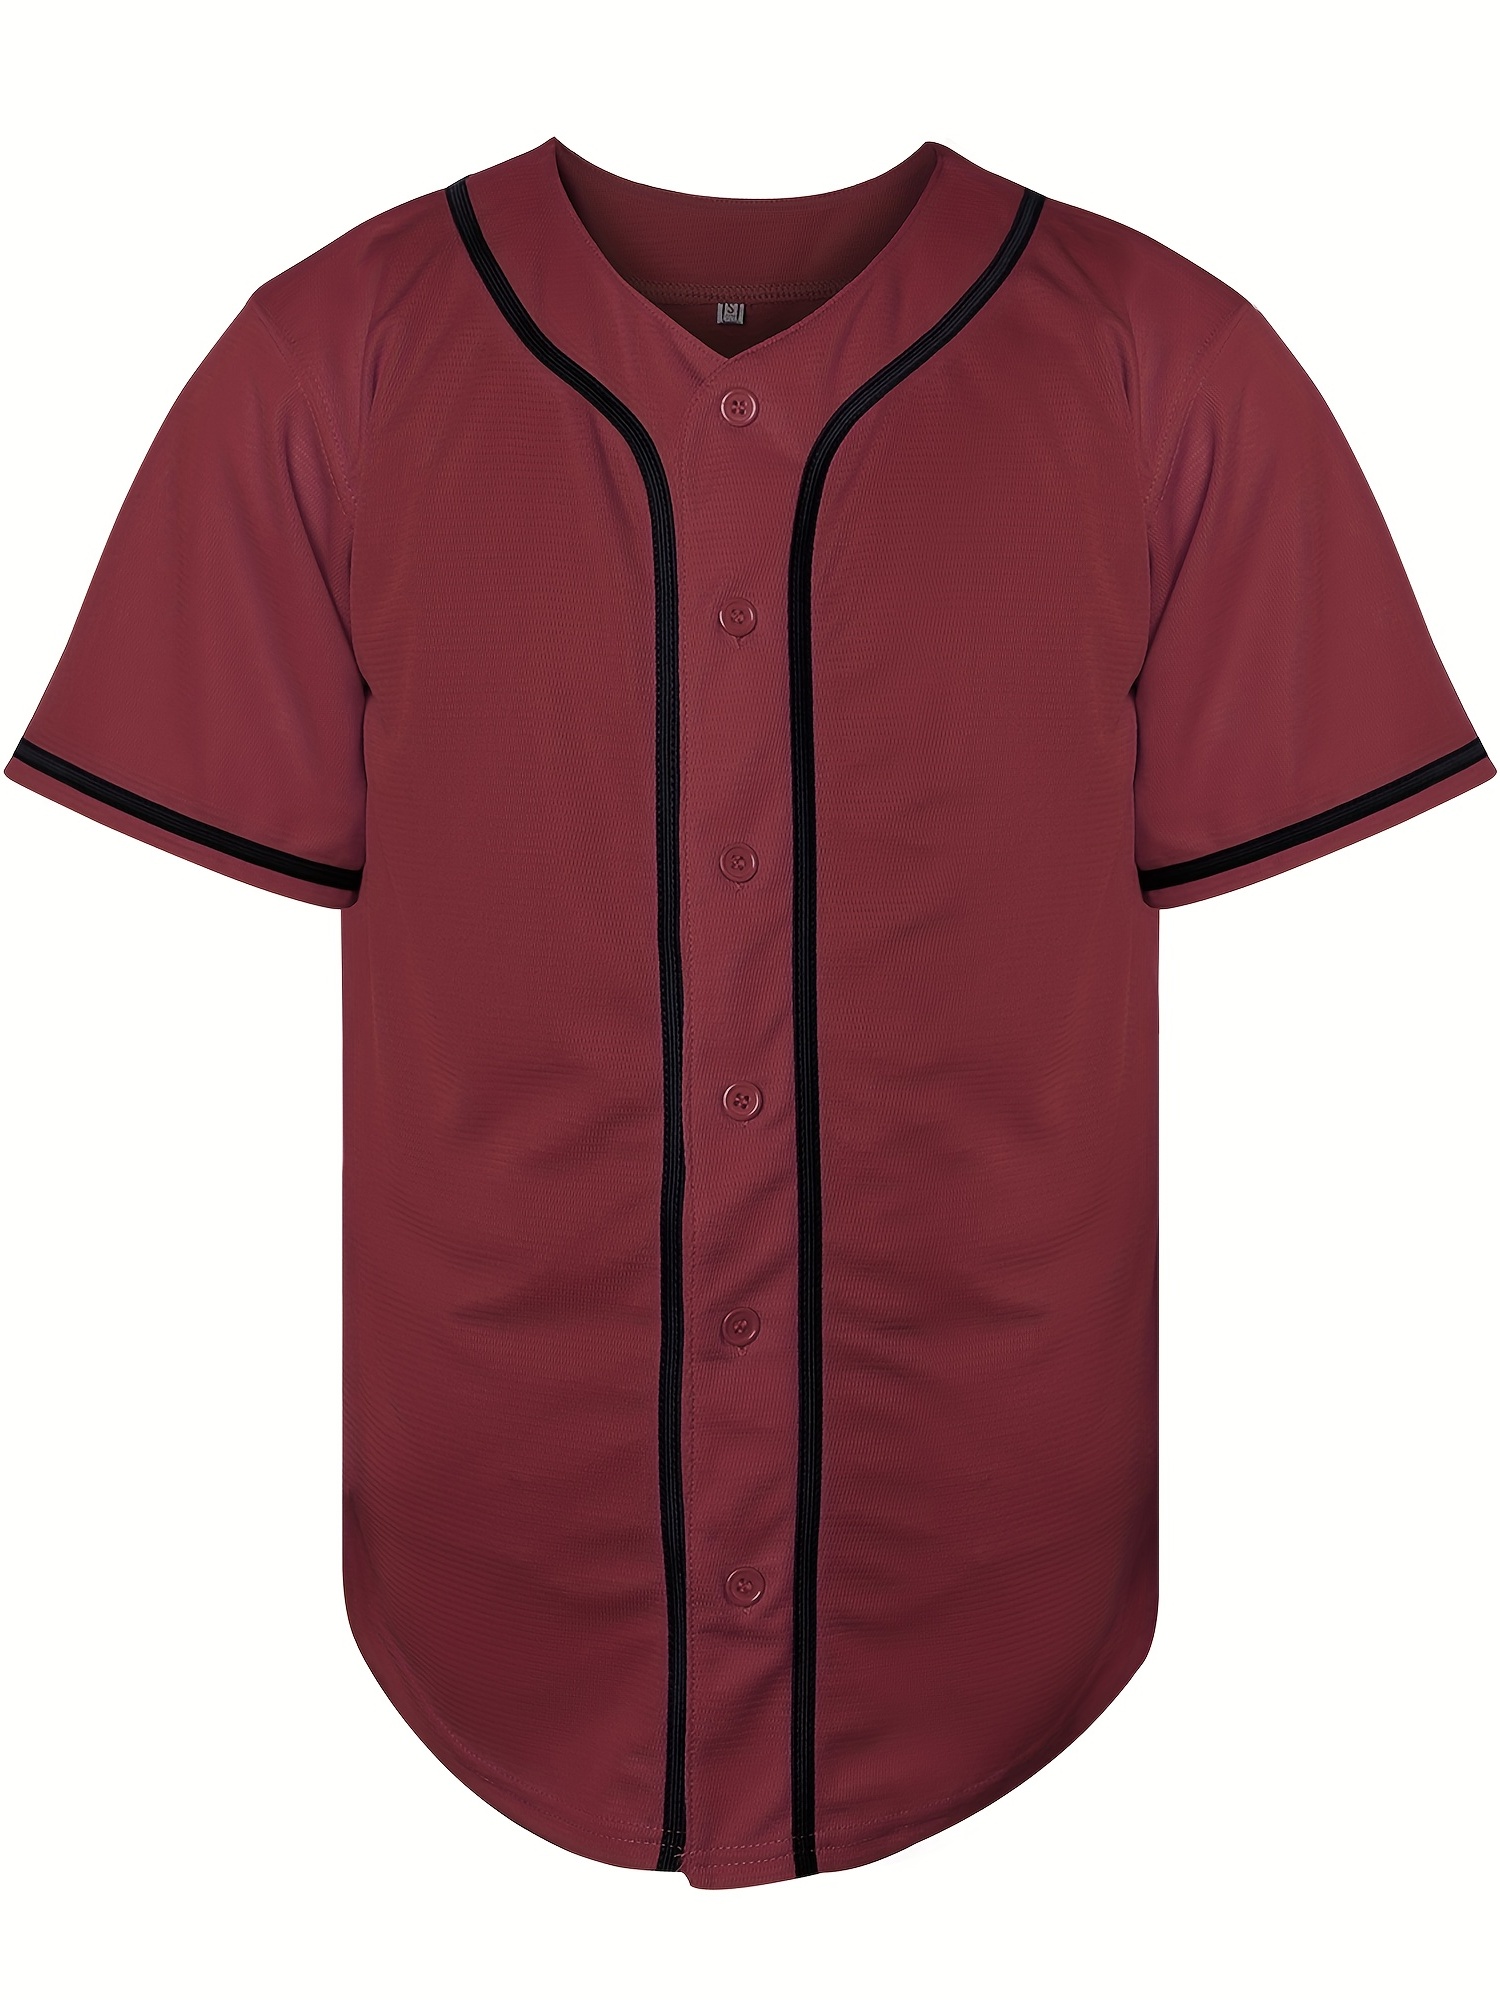 Mens Solid Baseball Jersey, Casual Button Up Short Sleeve Sports Uniform Hip Hop Shirt,Breathable, Quick Dry,Temu